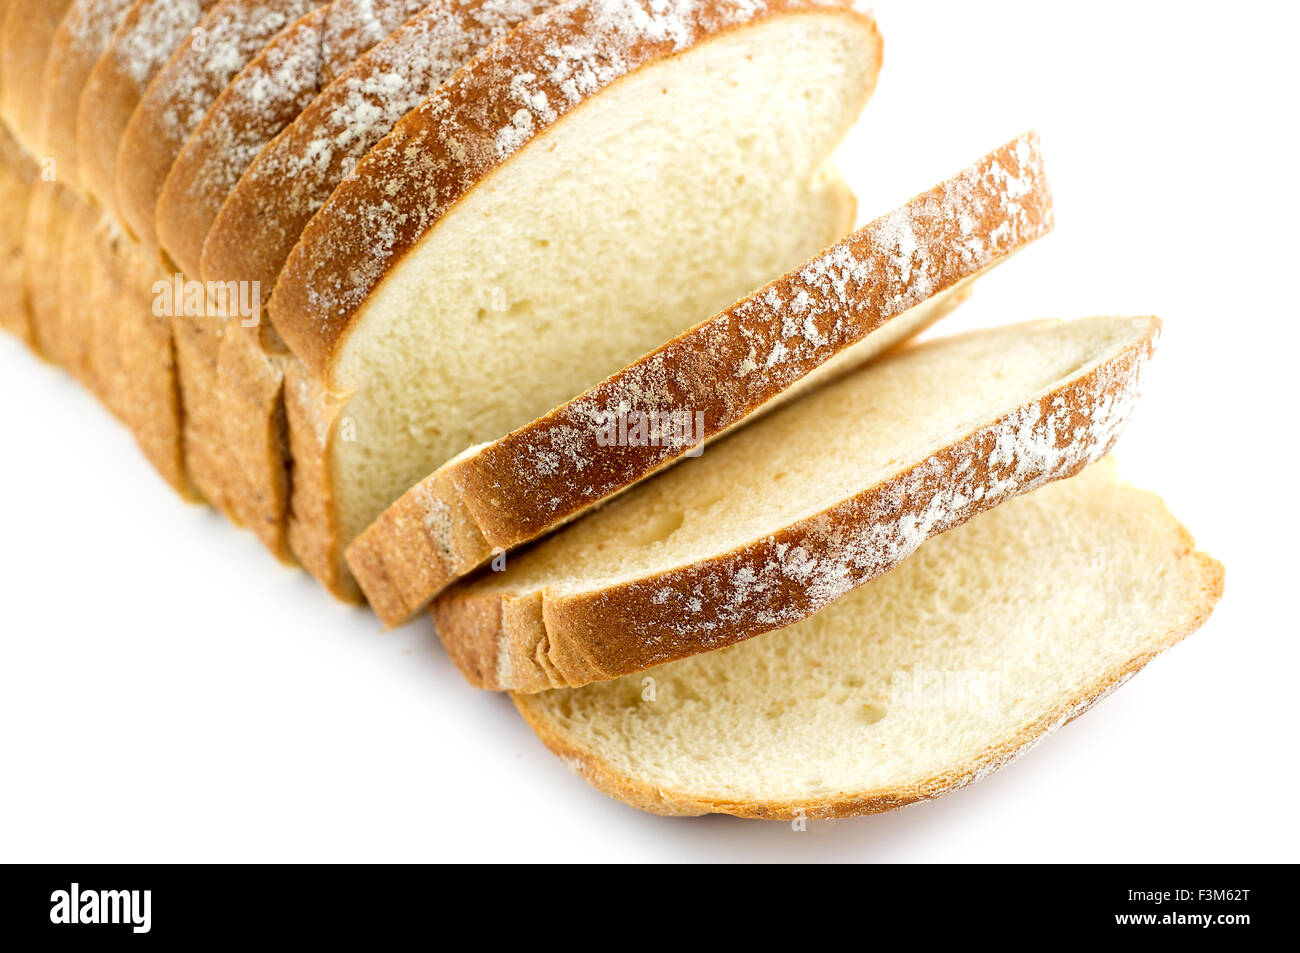 Loaf of bread, sliced, isolated on white Stock Photo